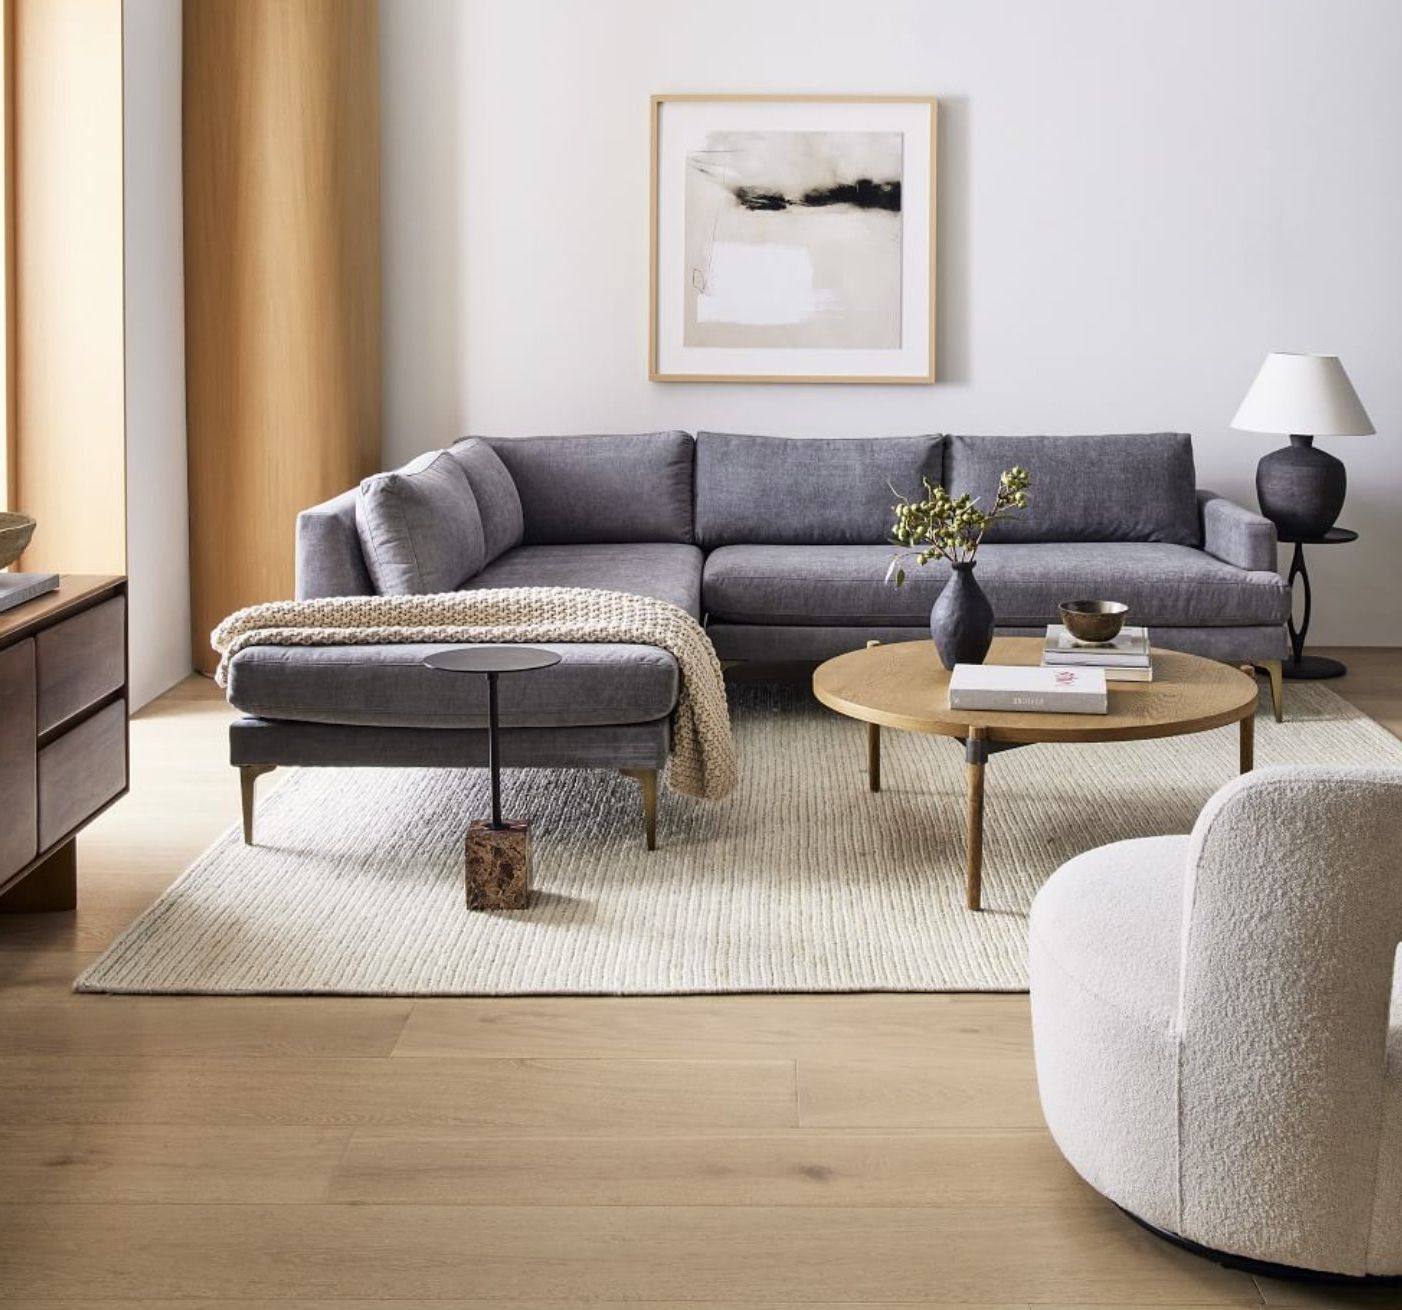 26 Amazing Sofas With Chaise Lounge – Happily Inspired In Sofas With Double Chaises (View 17 of 20)